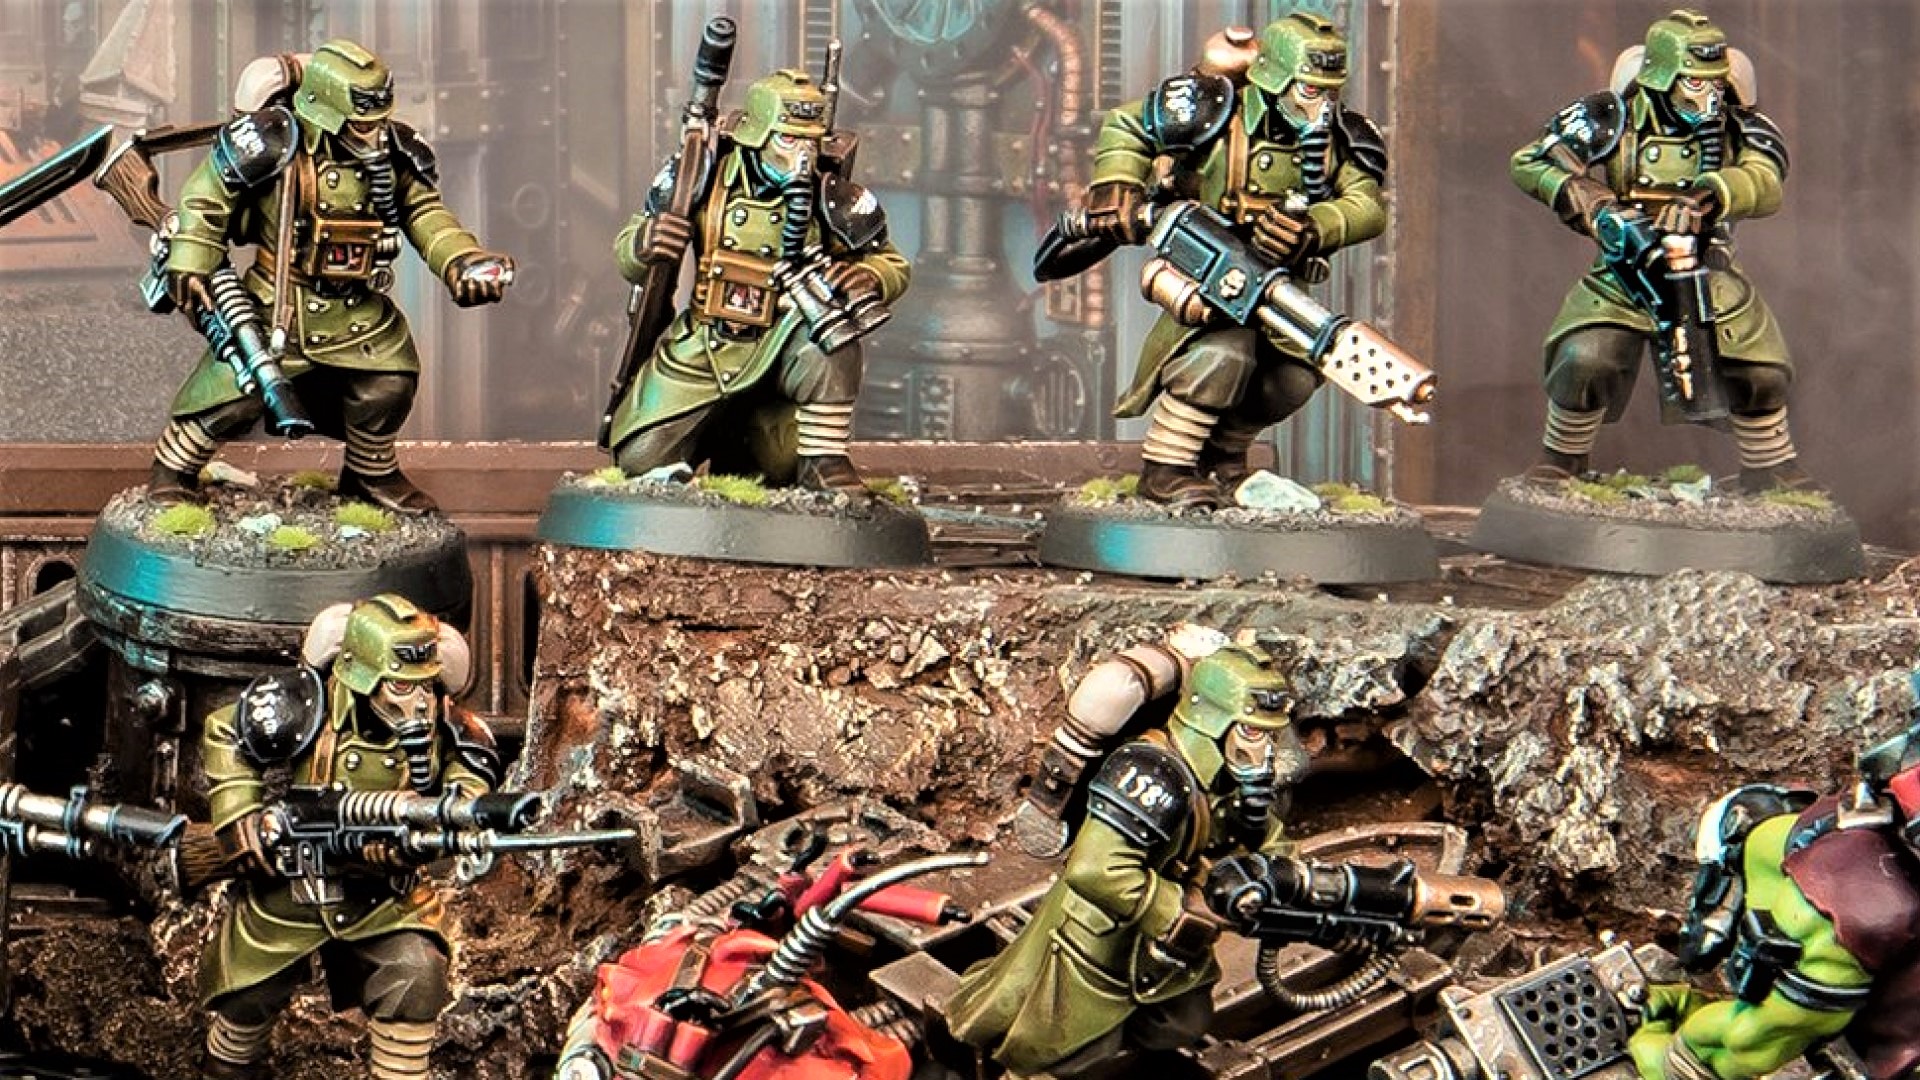 Kill Team 2nd Edition has new stats for 'actions', moving, and dodging